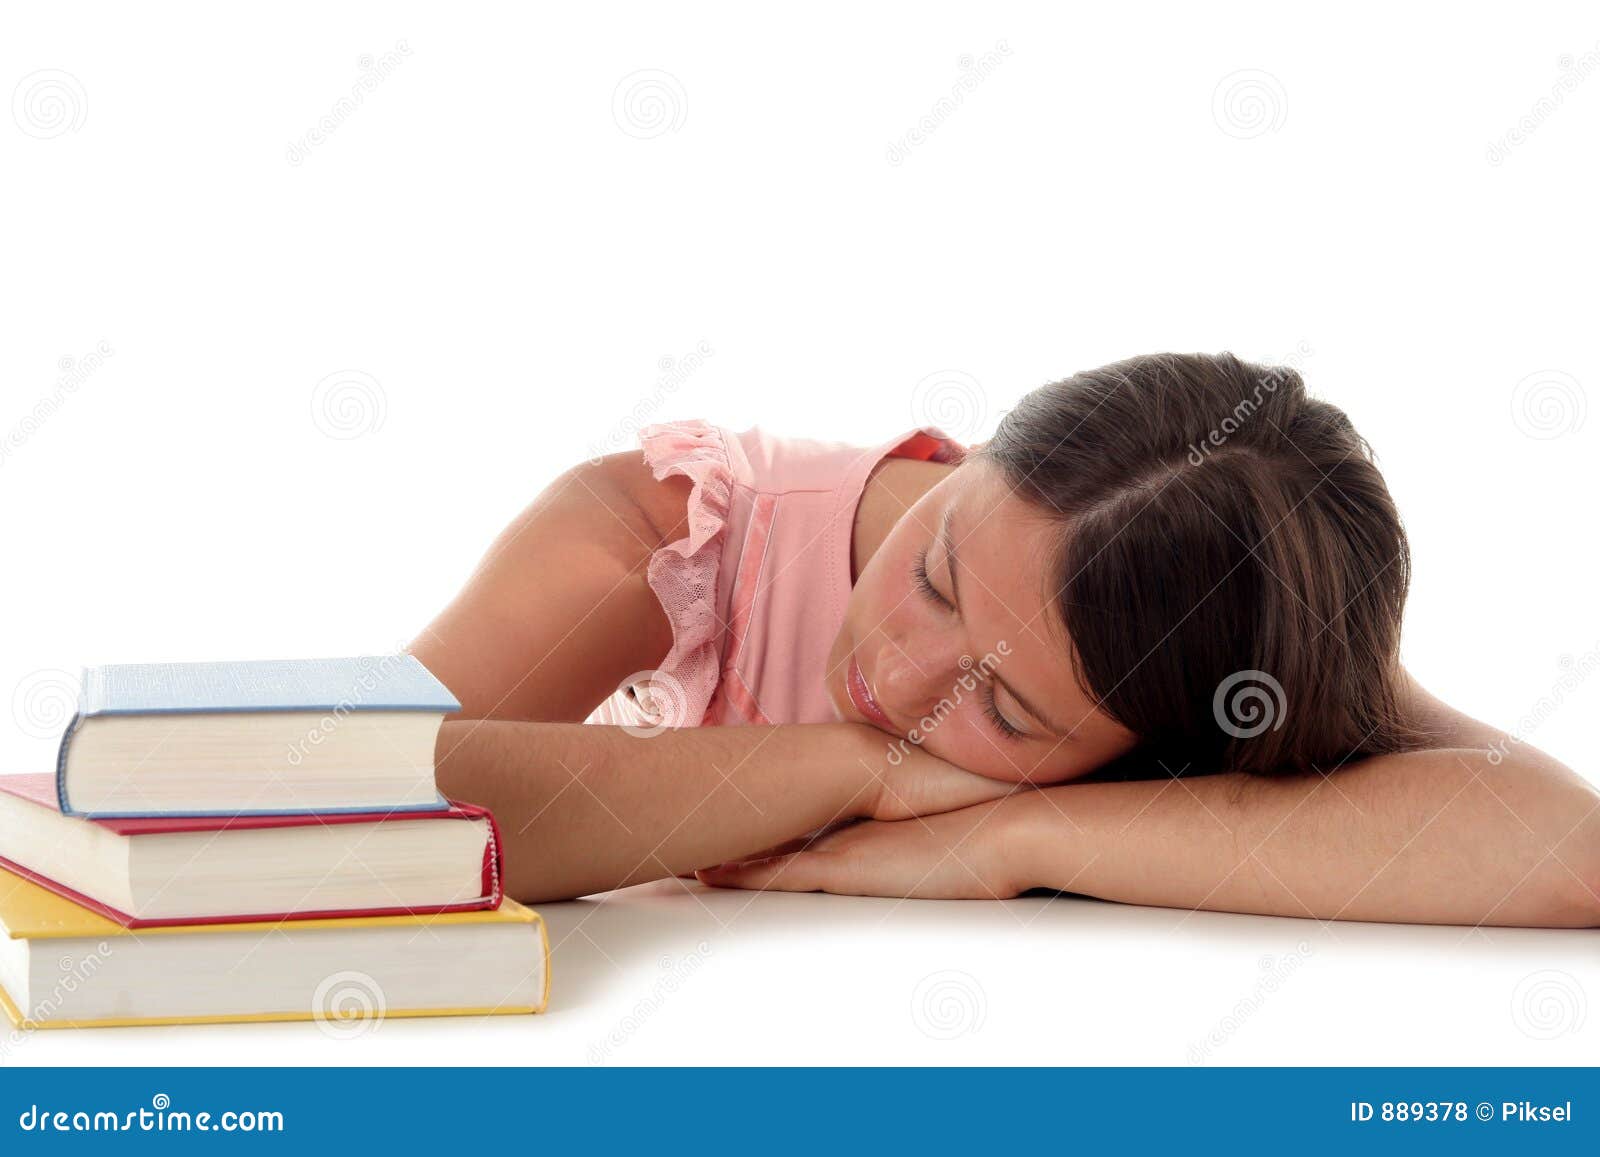 Woman Sleeping With Head On Desk Stock Photo Image Of Relax